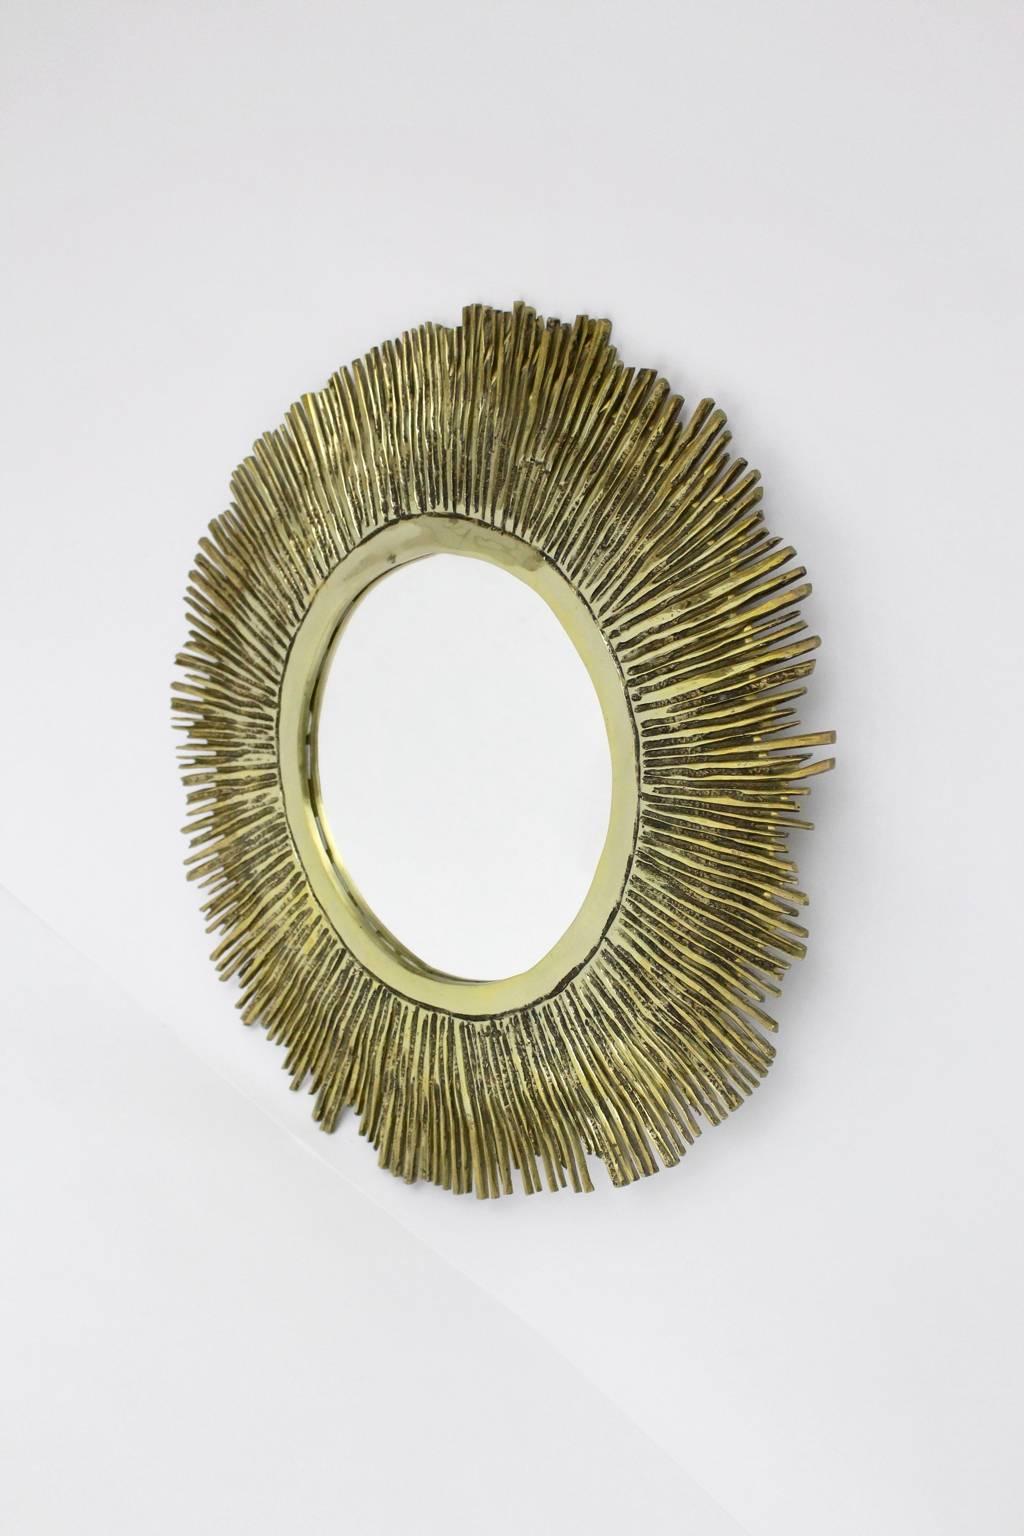 We present a huge solid brass cast sunburst mirror, which was designed in France during the 1960s.
The original condition is very good.

Measure: 
Total diameter is 63 cm 
The glass diameter is 29 cm 
The depth is 2 cm.
 